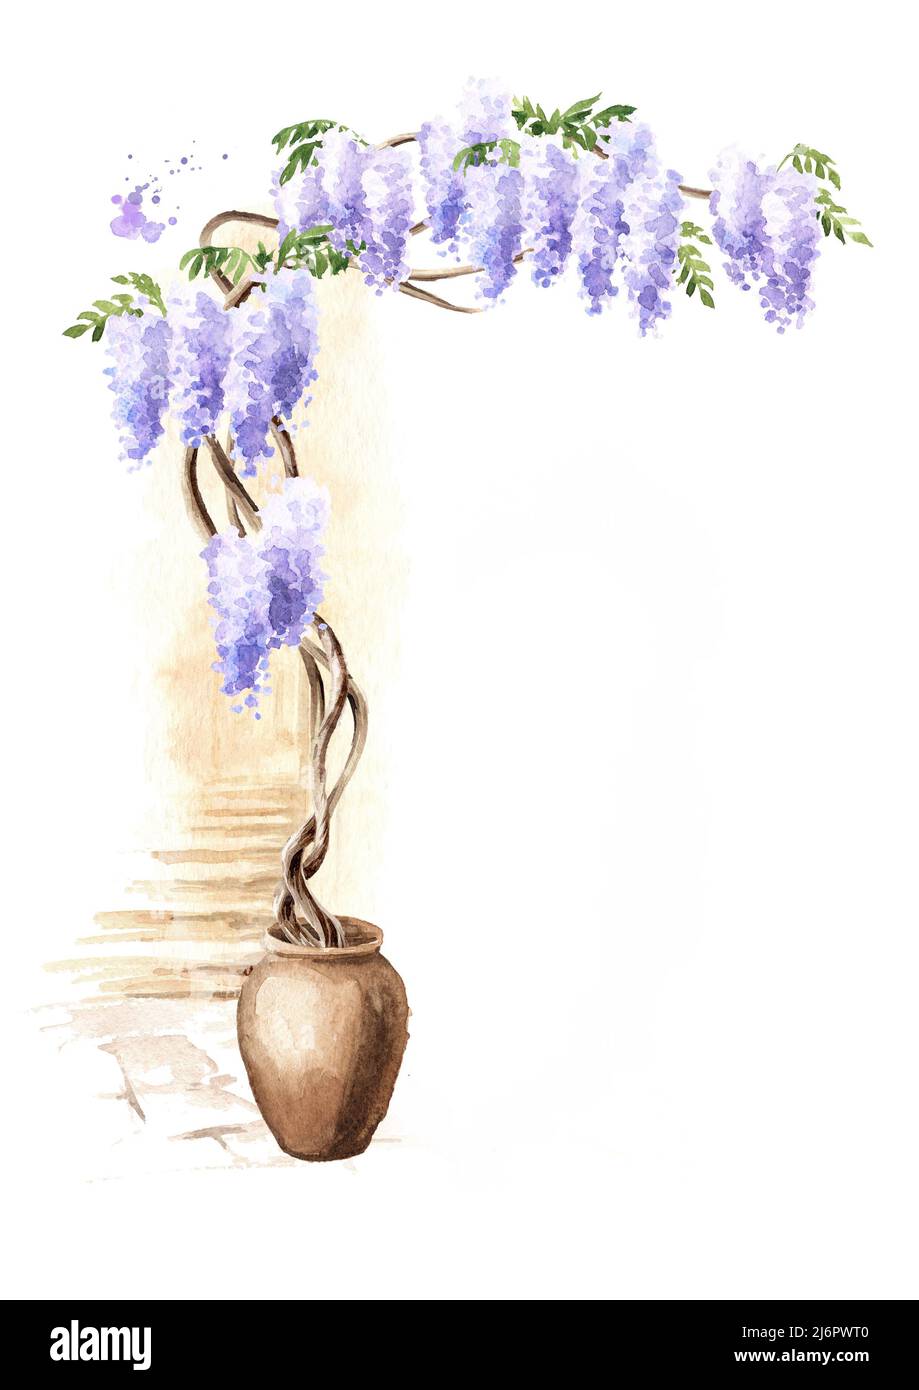 Wisteria  blossom tree.  Hand  drawn watercolor  illustration isolated on white background Stock Photo